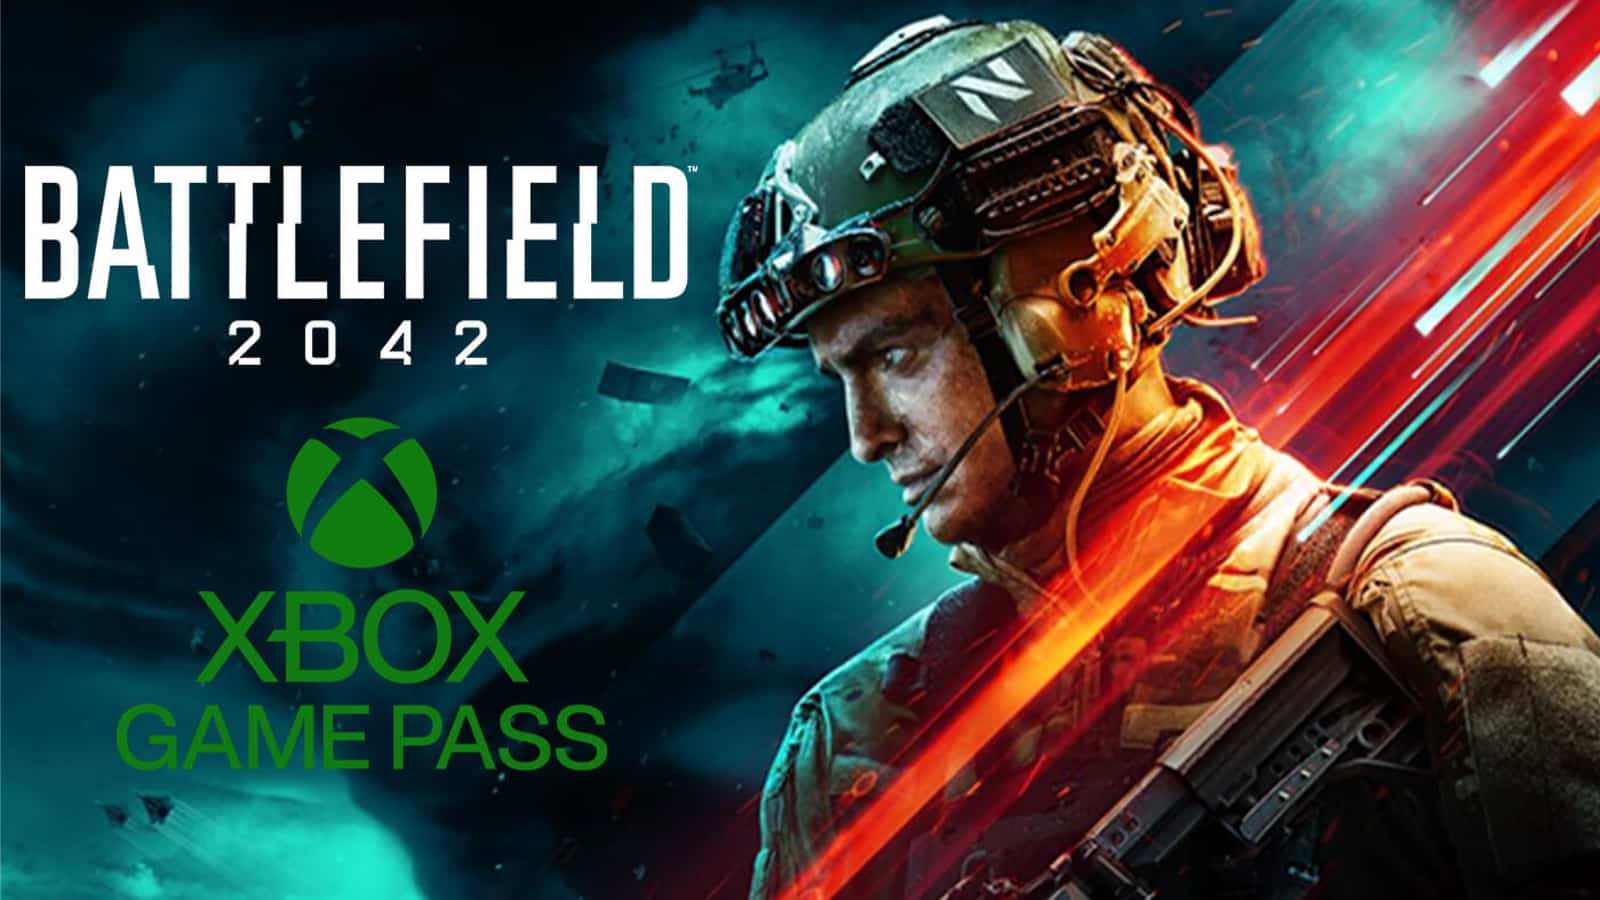 Battlefield 2042 and FIFA 22 Game Pass likely coming soon